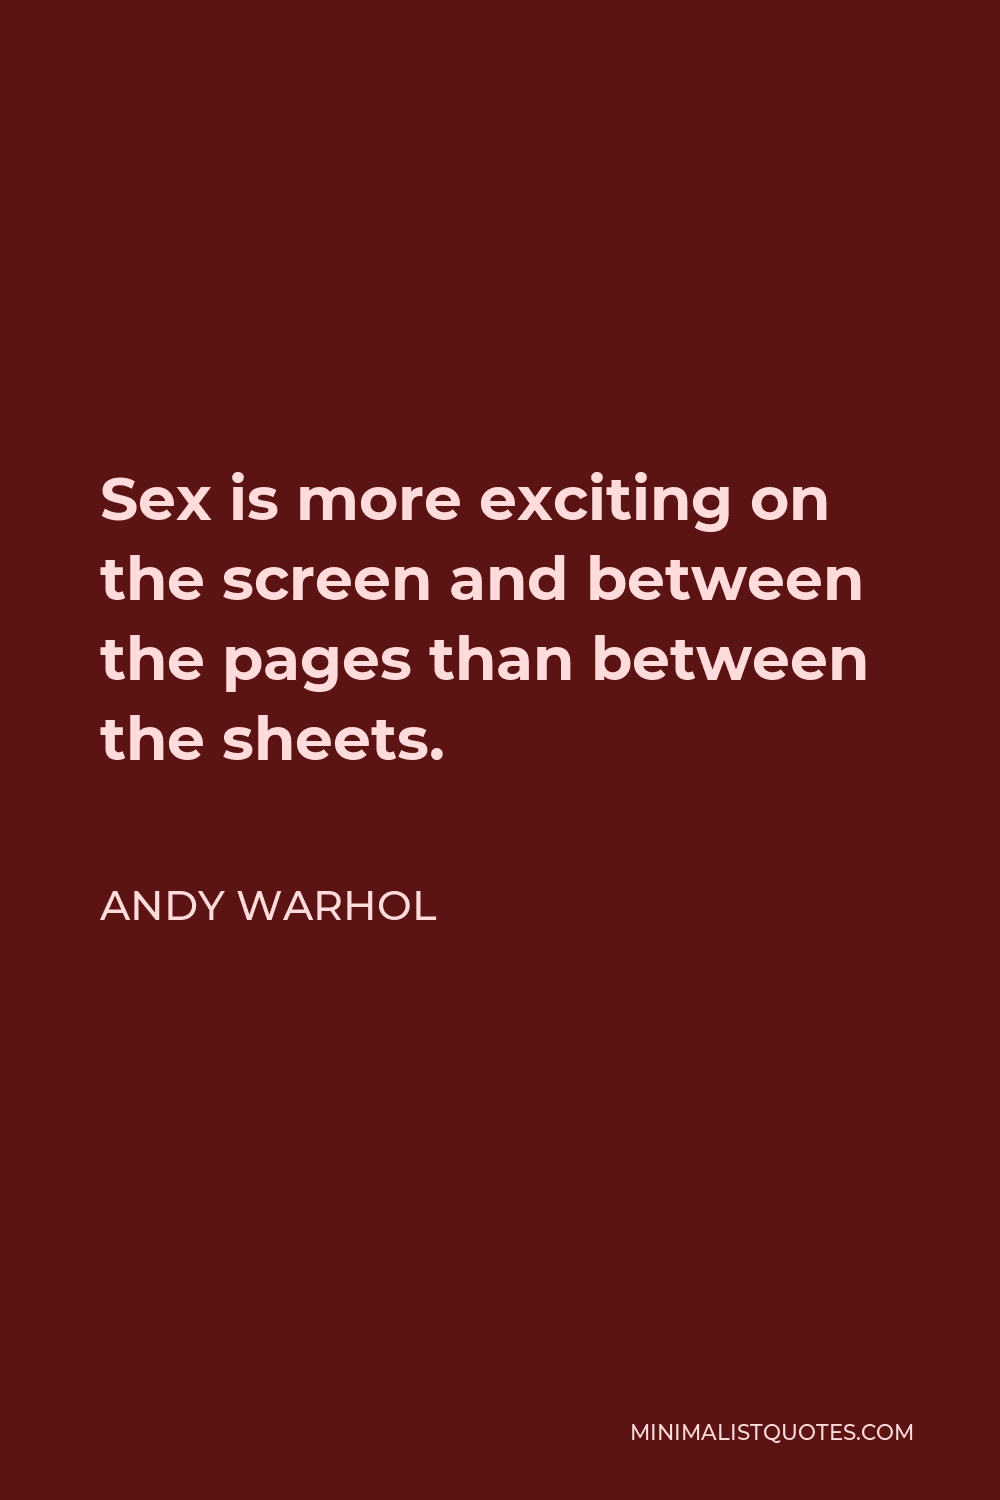 Andy Warhol Quote - Sex is more exciting on the screen and between the pages than between the sheets.